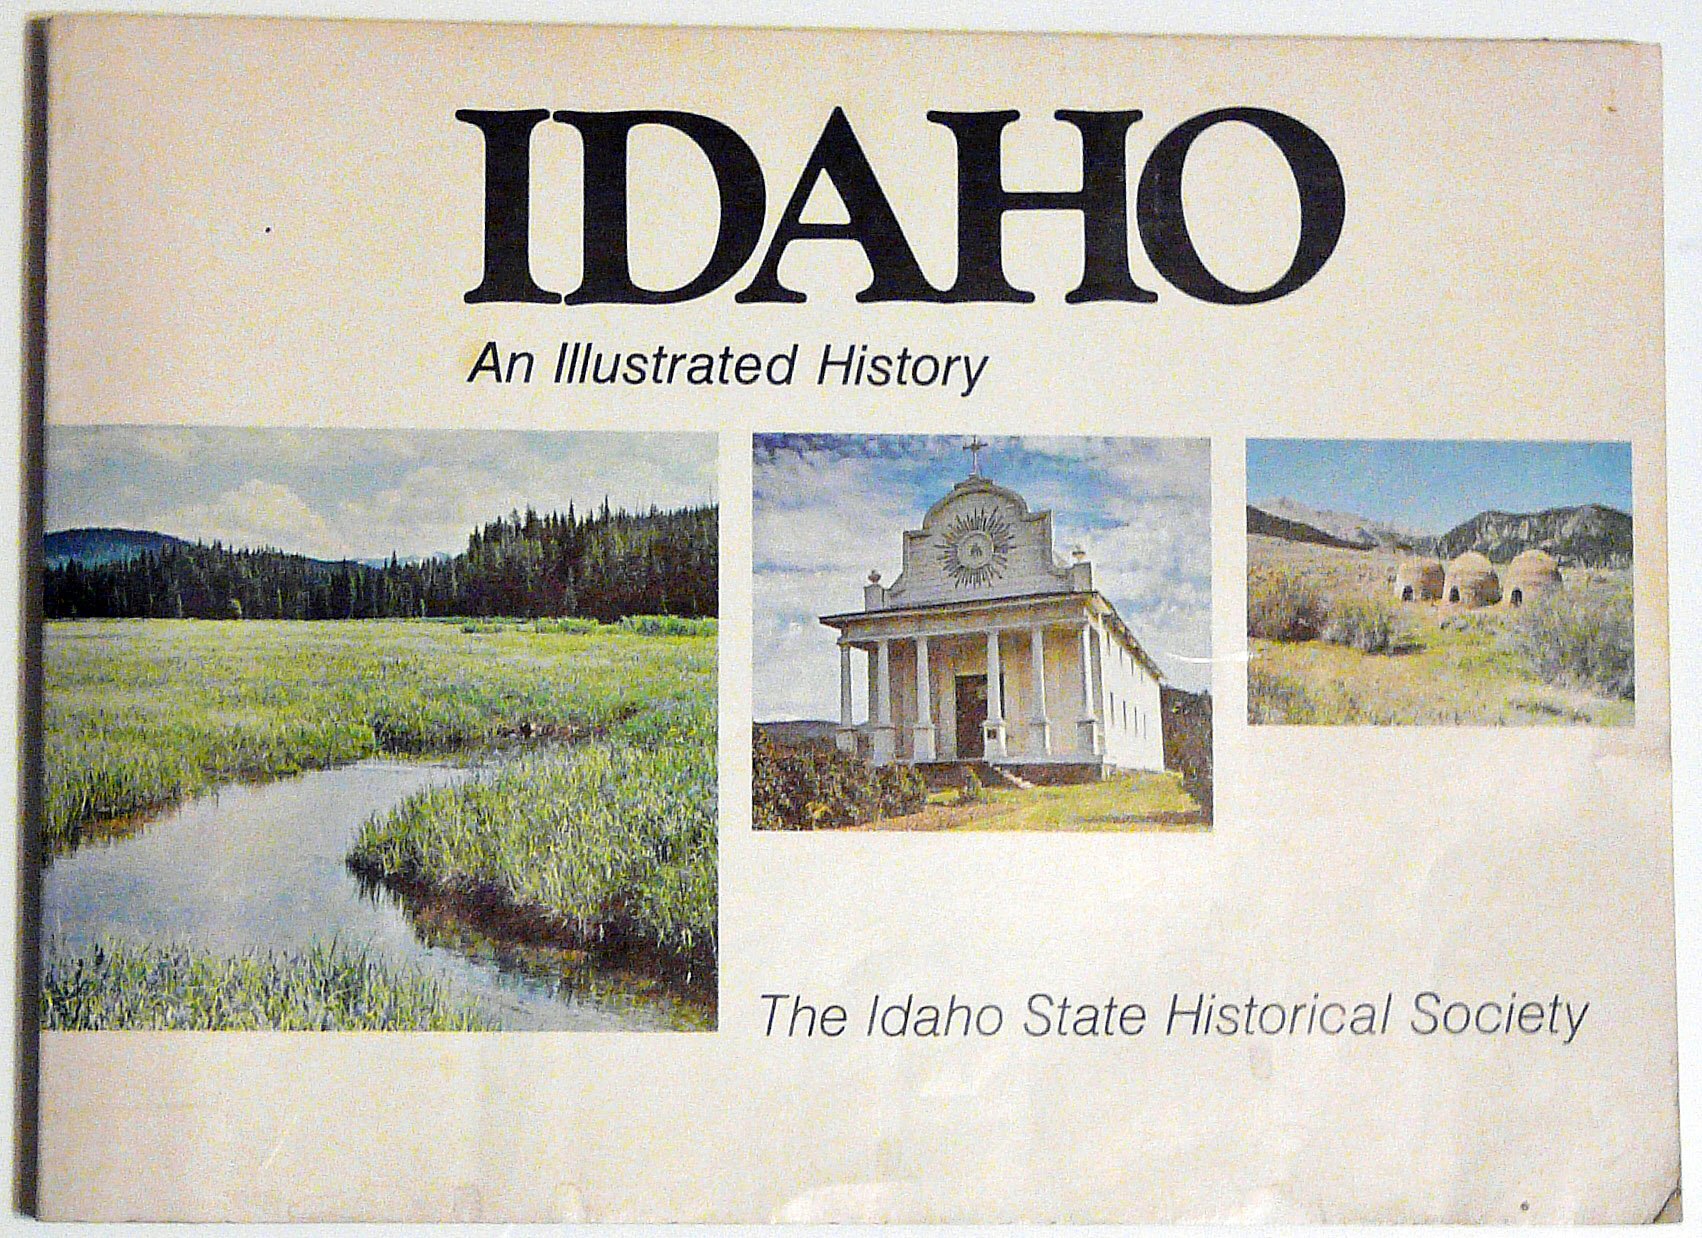 Idaho: An illustrated history (book cover)